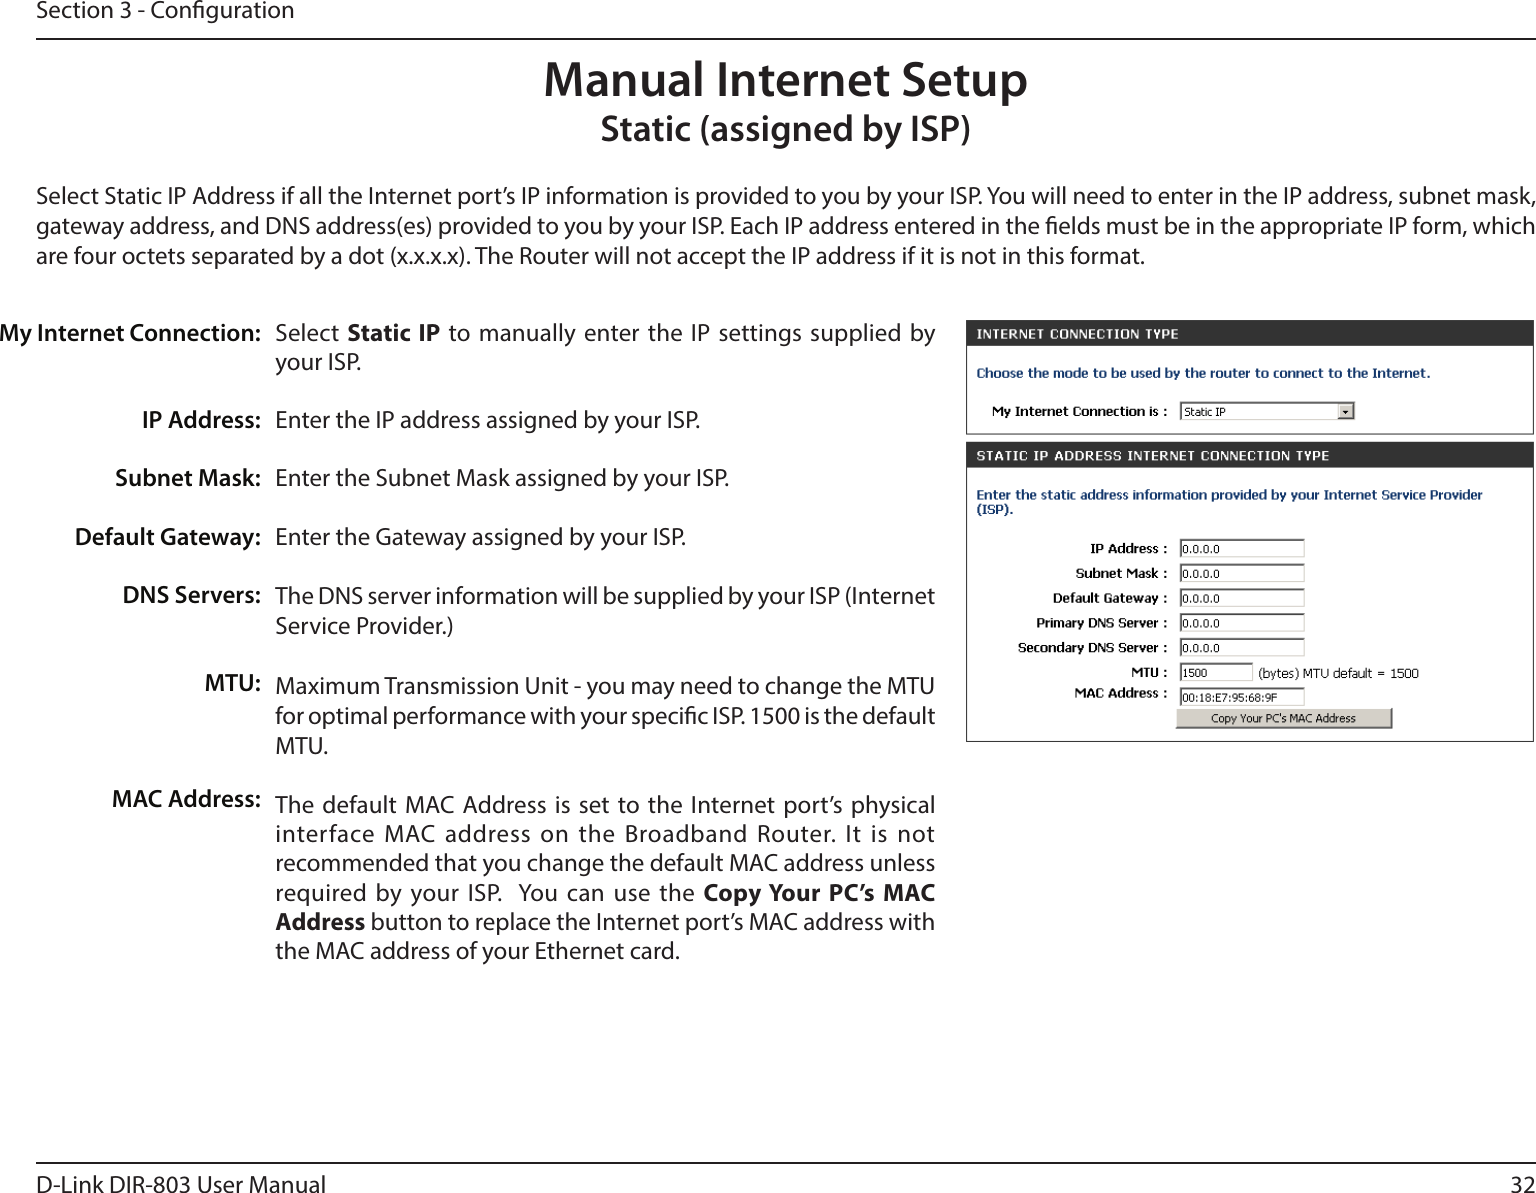 32D-Link DIR-803 User ManualSection 3 - CongurationSelect  Static IP to manually enter the IP settings supplied by your ISP.Enter the IP address assigned by your ISP.Enter the Subnet Mask assigned by your ISP.Enter the Gateway assigned by your ISP.The DNS server information will be supplied by your ISP (Internet Service Provider.)Maximum Transmission Unit - you may need to change the MTU for optimal performance with your specic ISP. 1500 is the default MTU.The default MAC Address is set to the Internet port’s physical interface MAC address on the Broadband Router. It is not recommended that you change the default MAC address unless required by your ISP.  You can use the Copy Your PC’s MAC Address button to replace the Internet port’s MAC address with the MAC address of your Ethernet card.My Internet Connection:IP Address:Subnet Mask:Default Gateway:DNS Servers:MTU:MAC Address:Manual Internet SetupStatic (assigned by ISP)Select Static IP Address if all the Internet port’s IP information is provided to you by your ISP. You will need to enter in the IP address, subnet mask, gateway address, and DNS address(es) provided to you by your ISP. Each IP address entered in the elds must be in the appropriate IP form, which are four octets separated by a dot (x.x.x.x). The Router will not accept the IP address if it is not in this format.